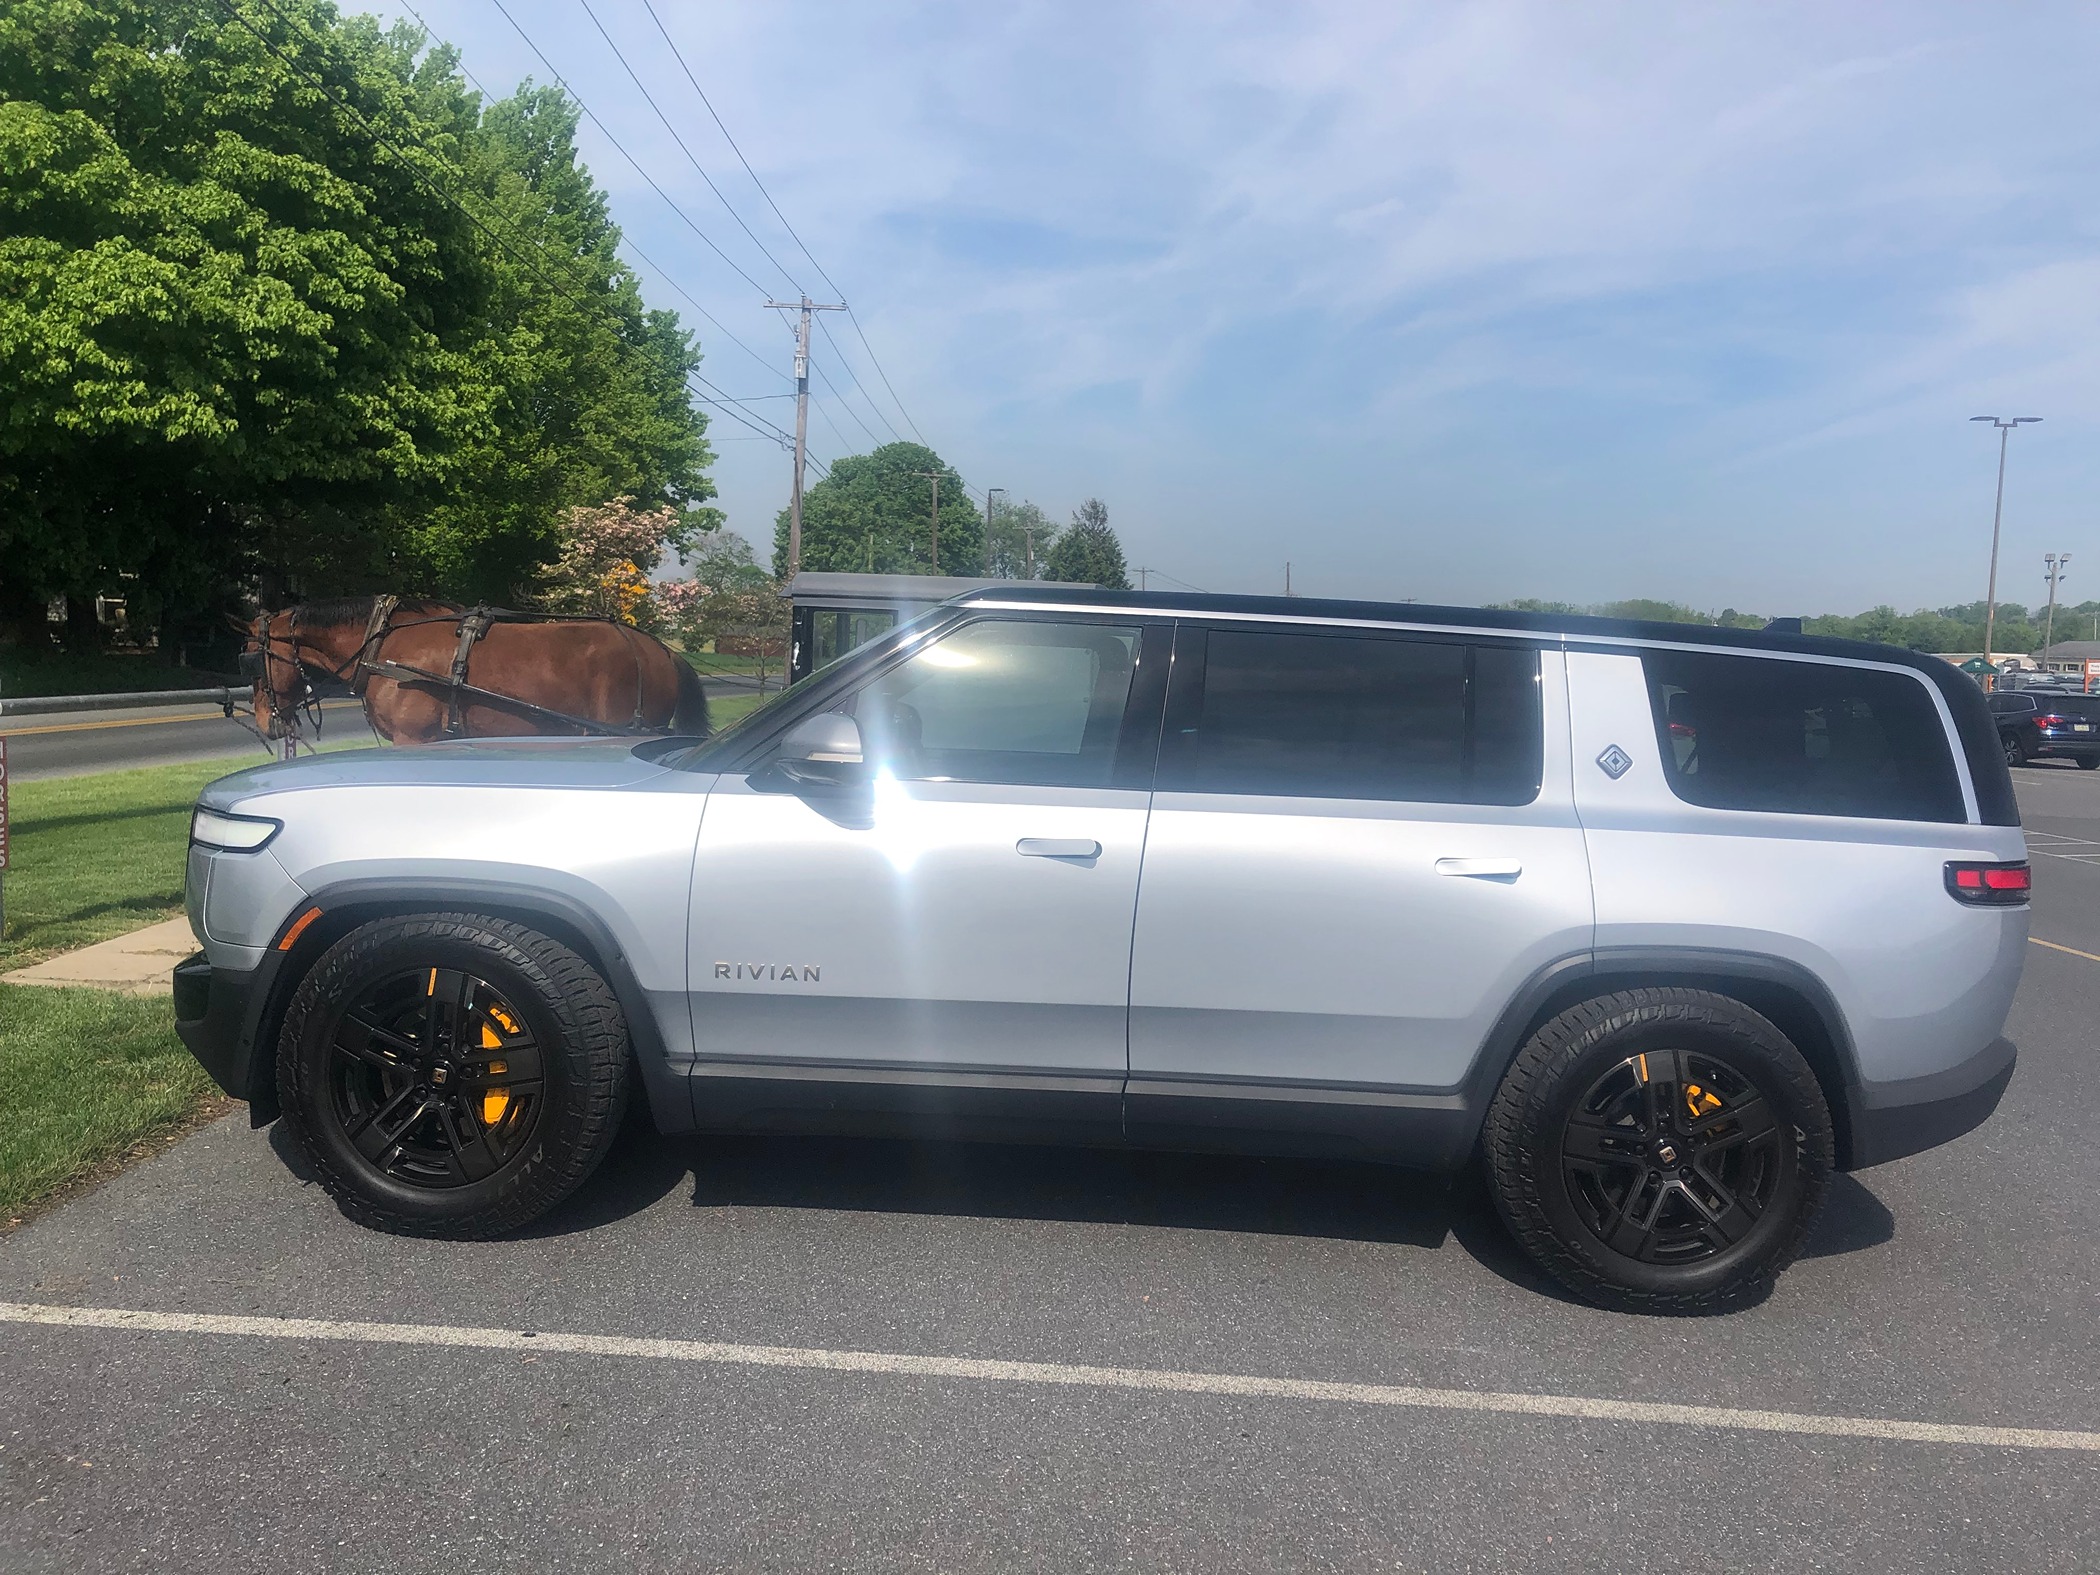 Rivian R1T R1S Random Rivian Photos of the Day - Post Yours! 📸 🤳 Rosey Next to Buggy 2